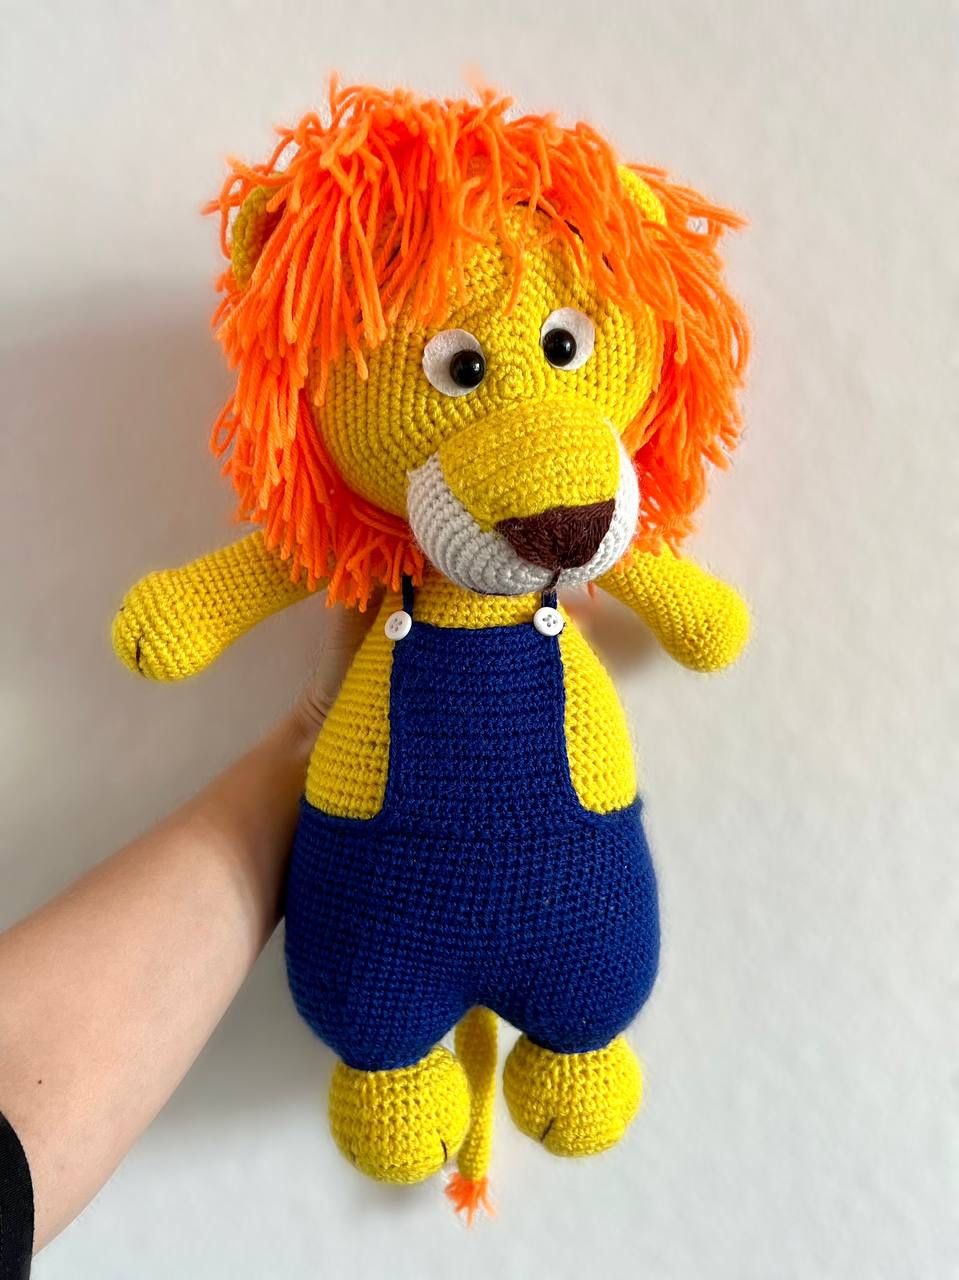 One of a kind handmade 16" knitted Lion